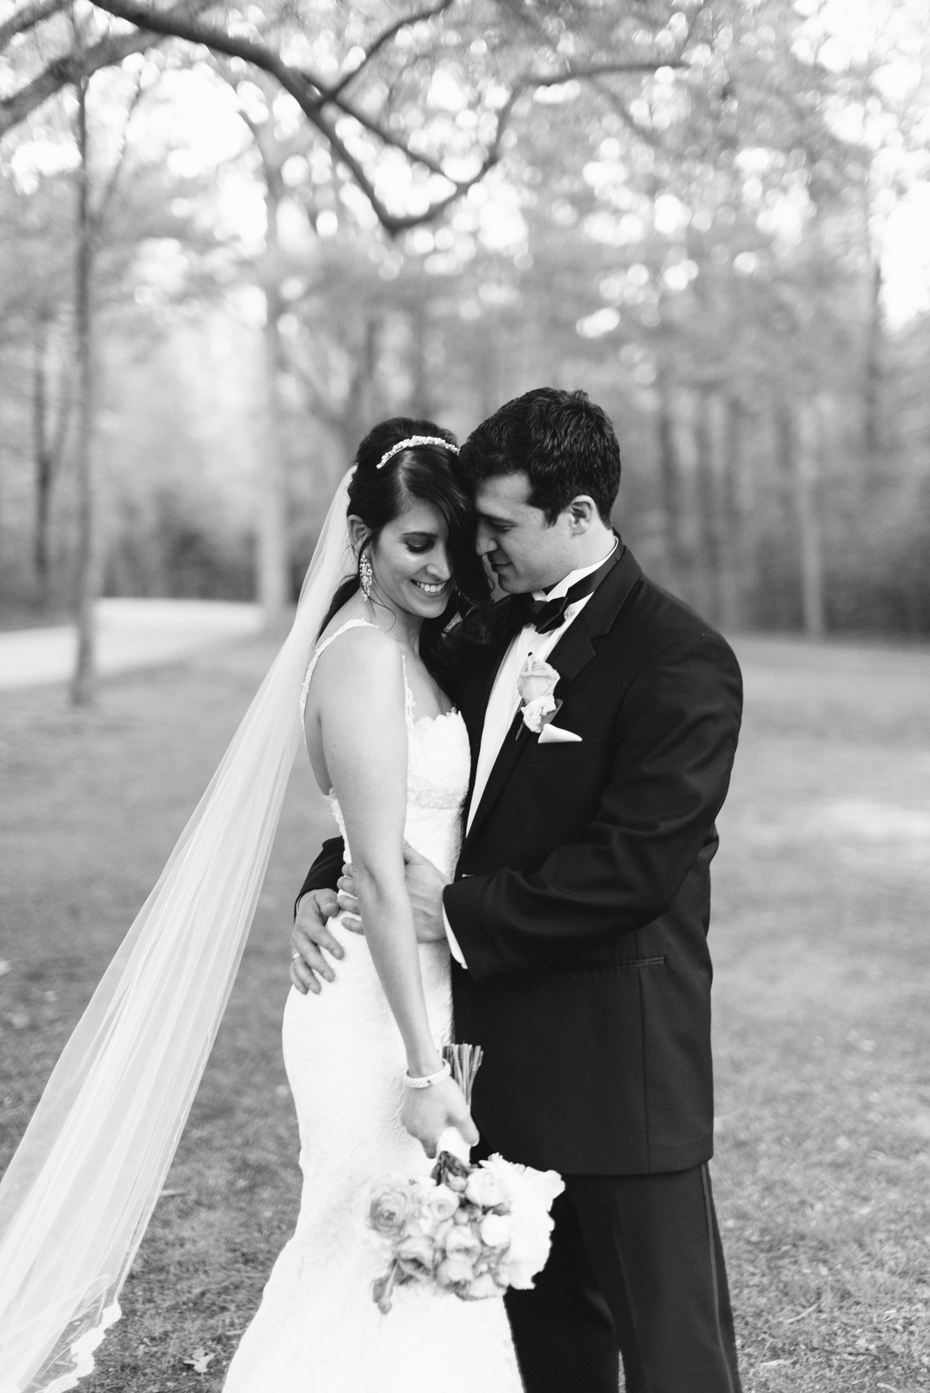 Bride and groom snuggle close at the Noland Trail by Virginia Wedding Photographer, Heather Jowett.